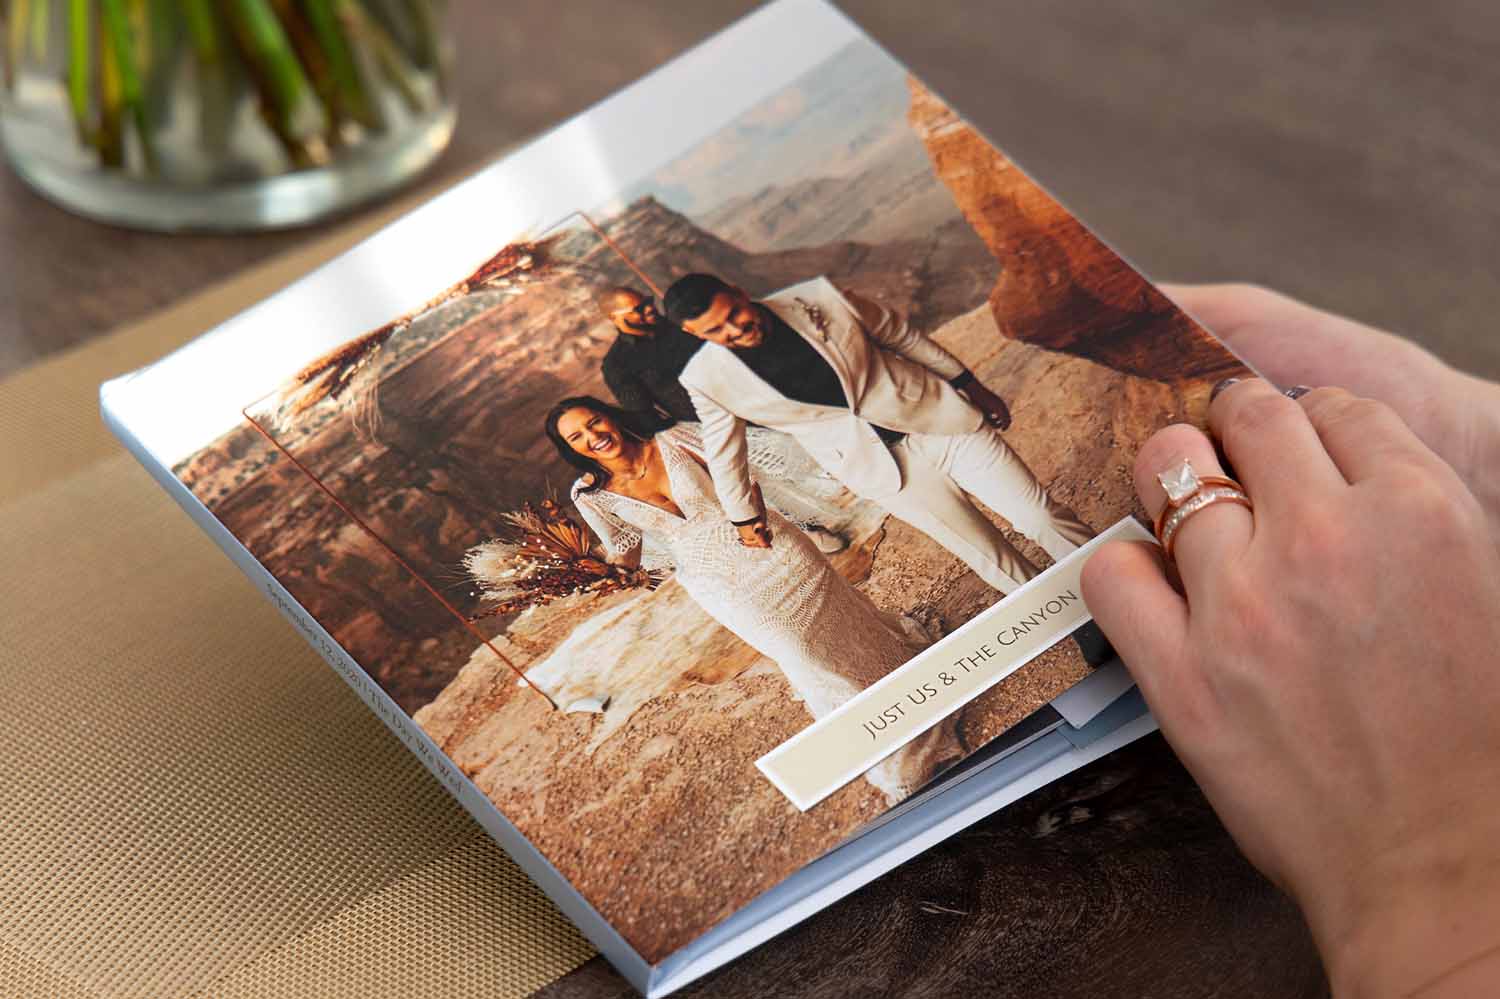 Wedding photo book showing a recently married couple